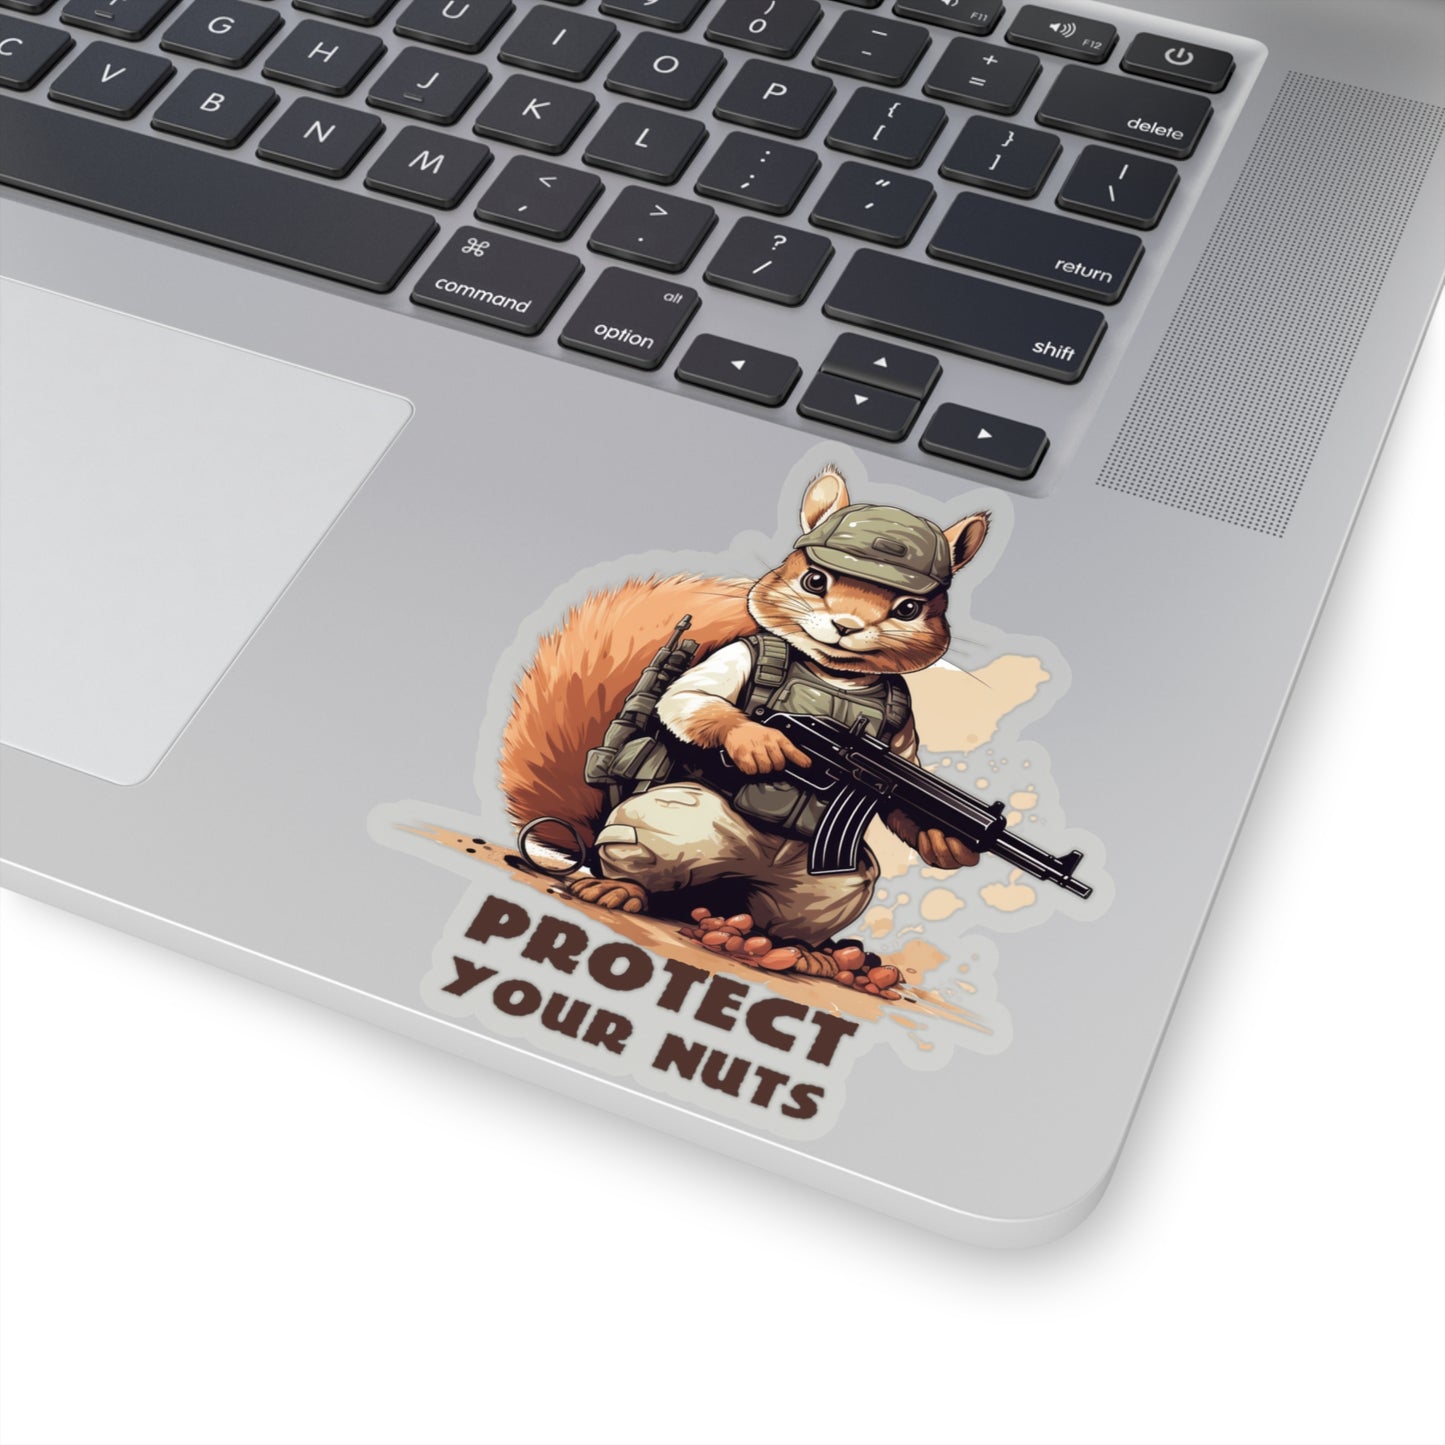 Protect your nuts Sticker